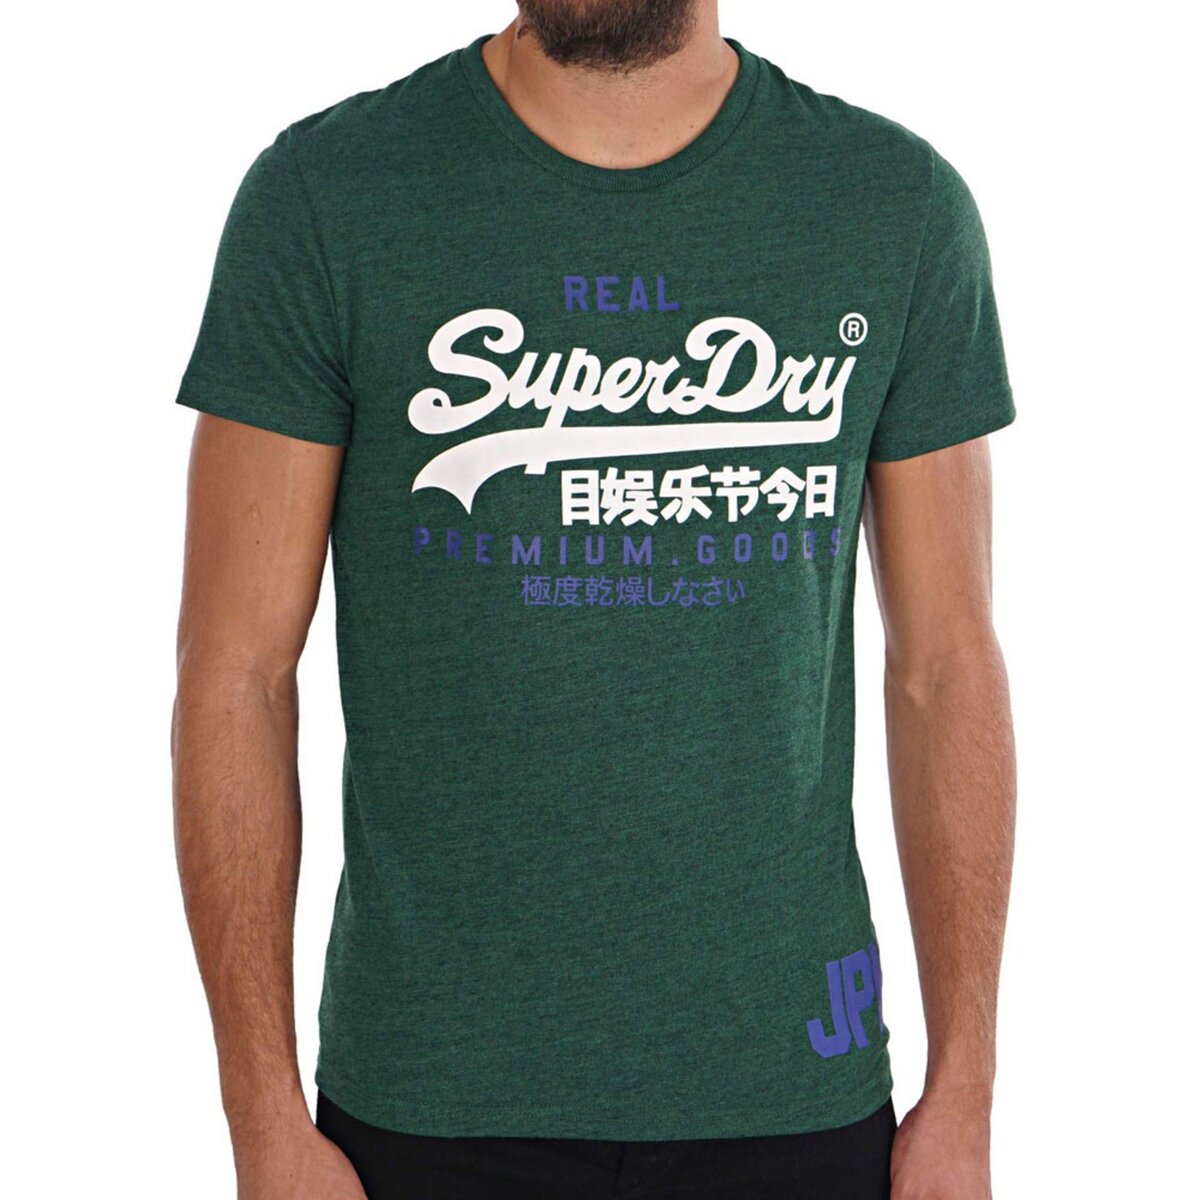 SUPERDRY T-shirt Vert Homme Superdry Duo